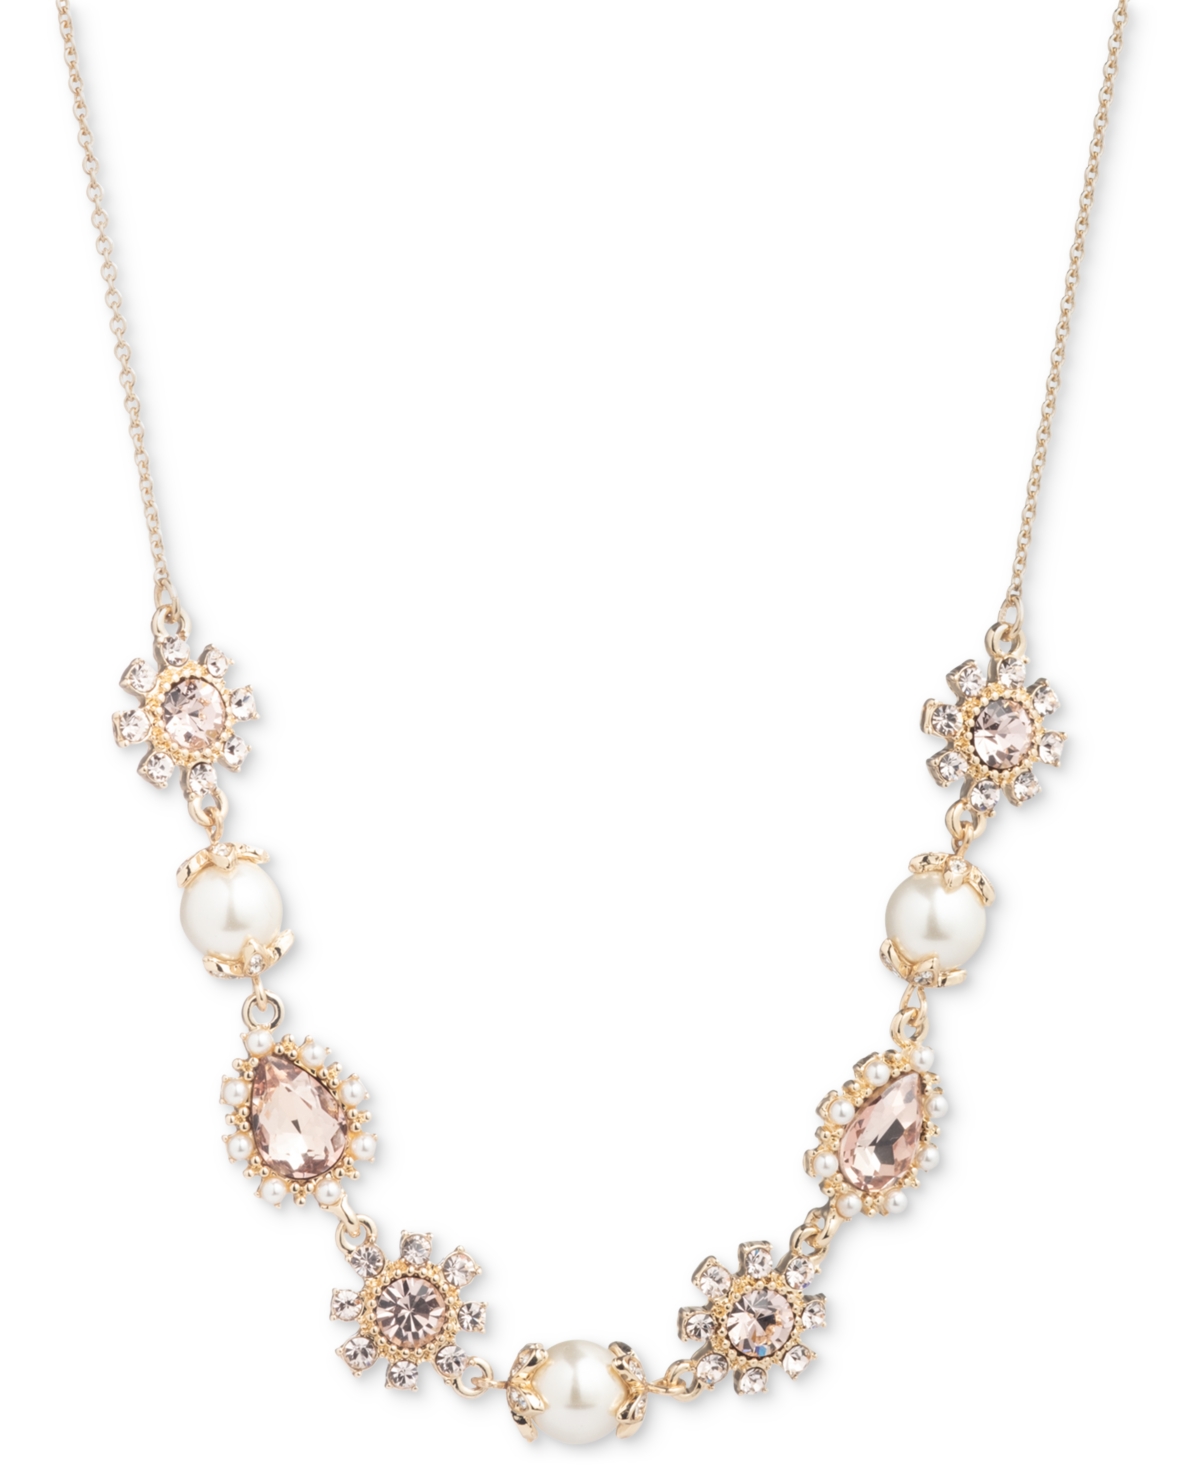 Marchesa Gold-tone Crystal & Imitation Pearl Statement Necklace, 16" + 3" Extender In Cameo Pink